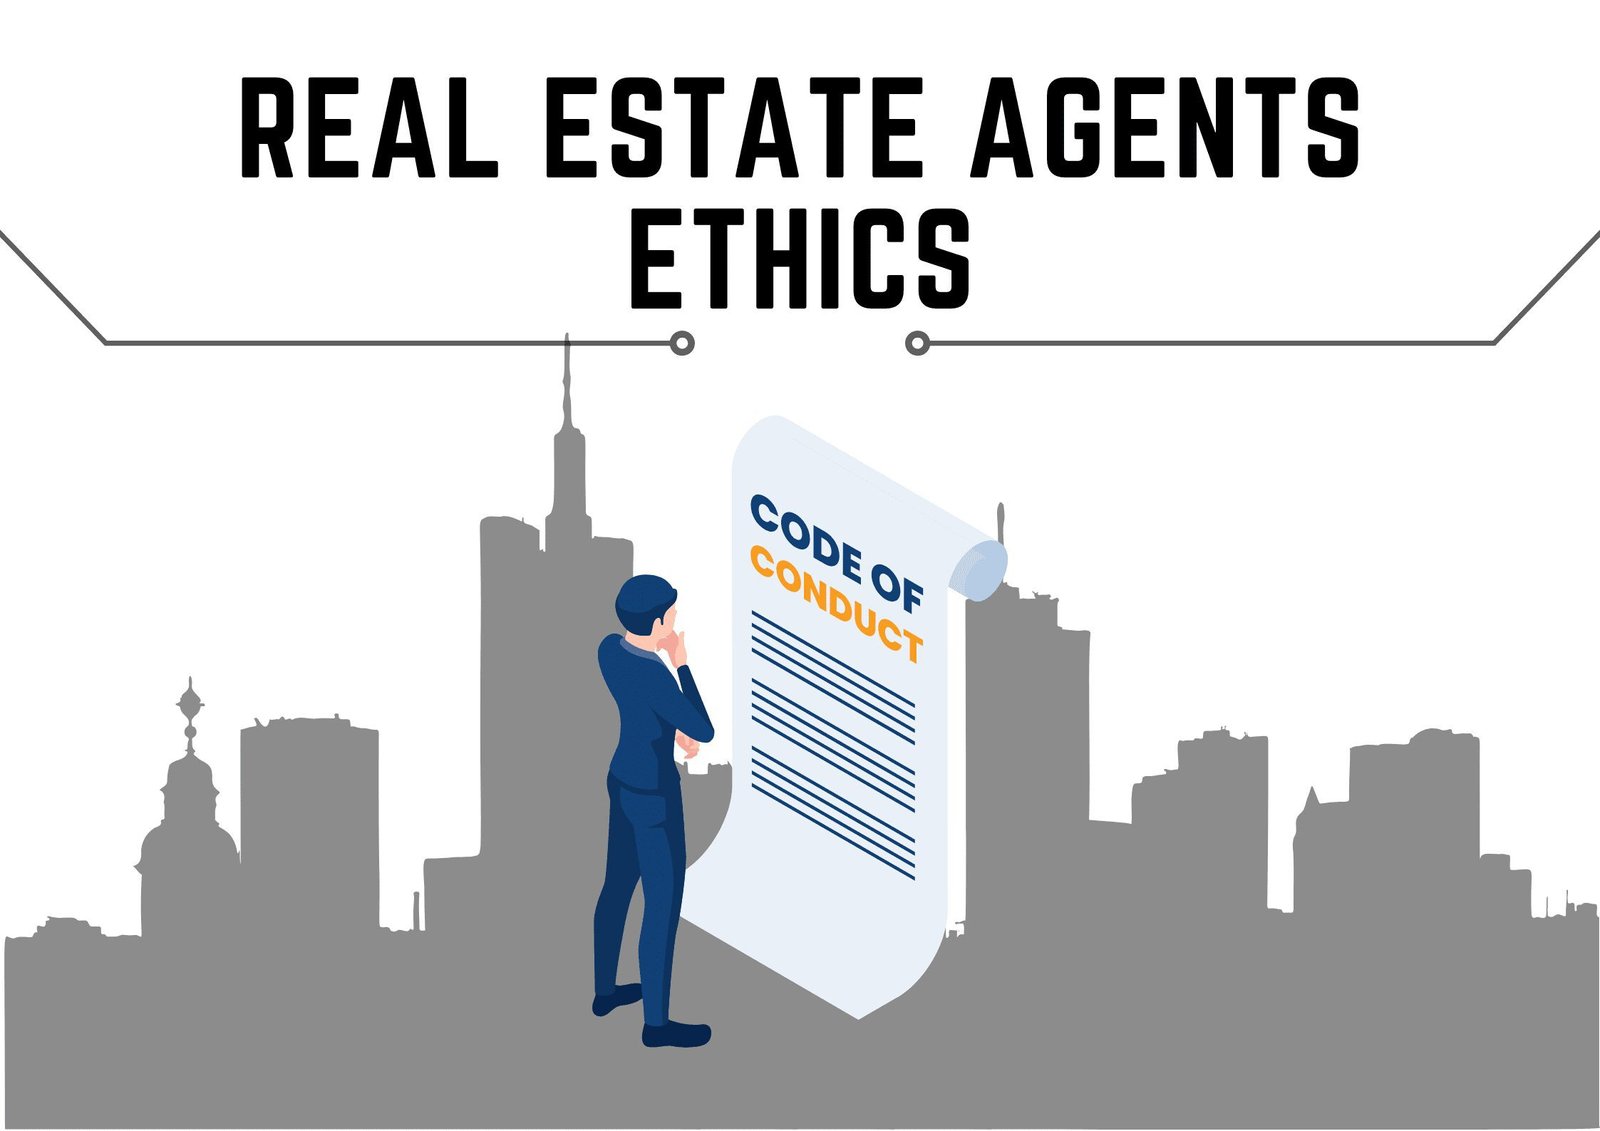 Real Estate Agents Ethics